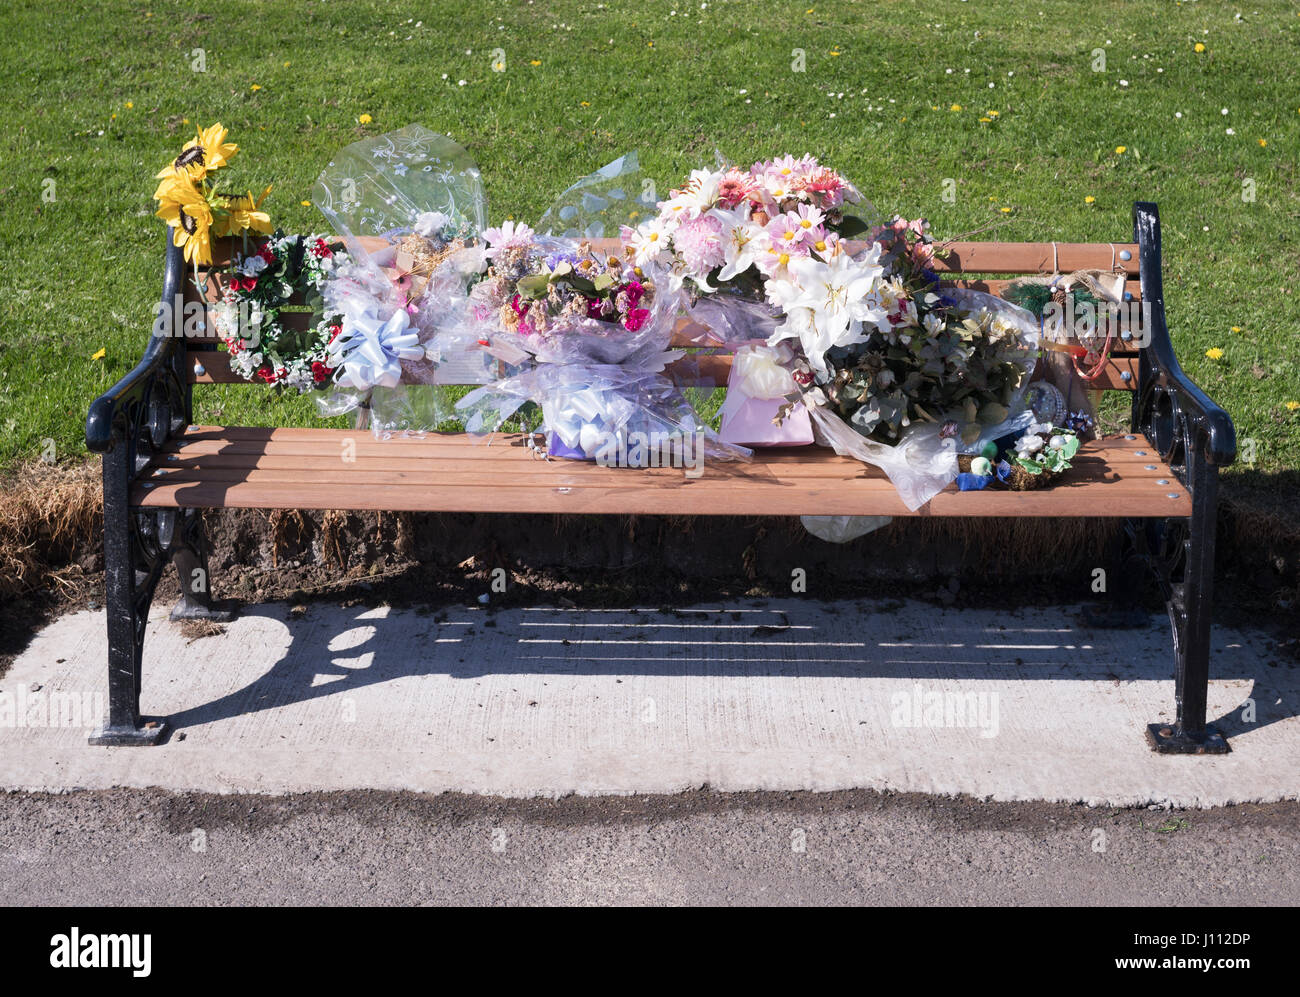 A memorial bench covered in floral tributes, England, UK Stock Photo